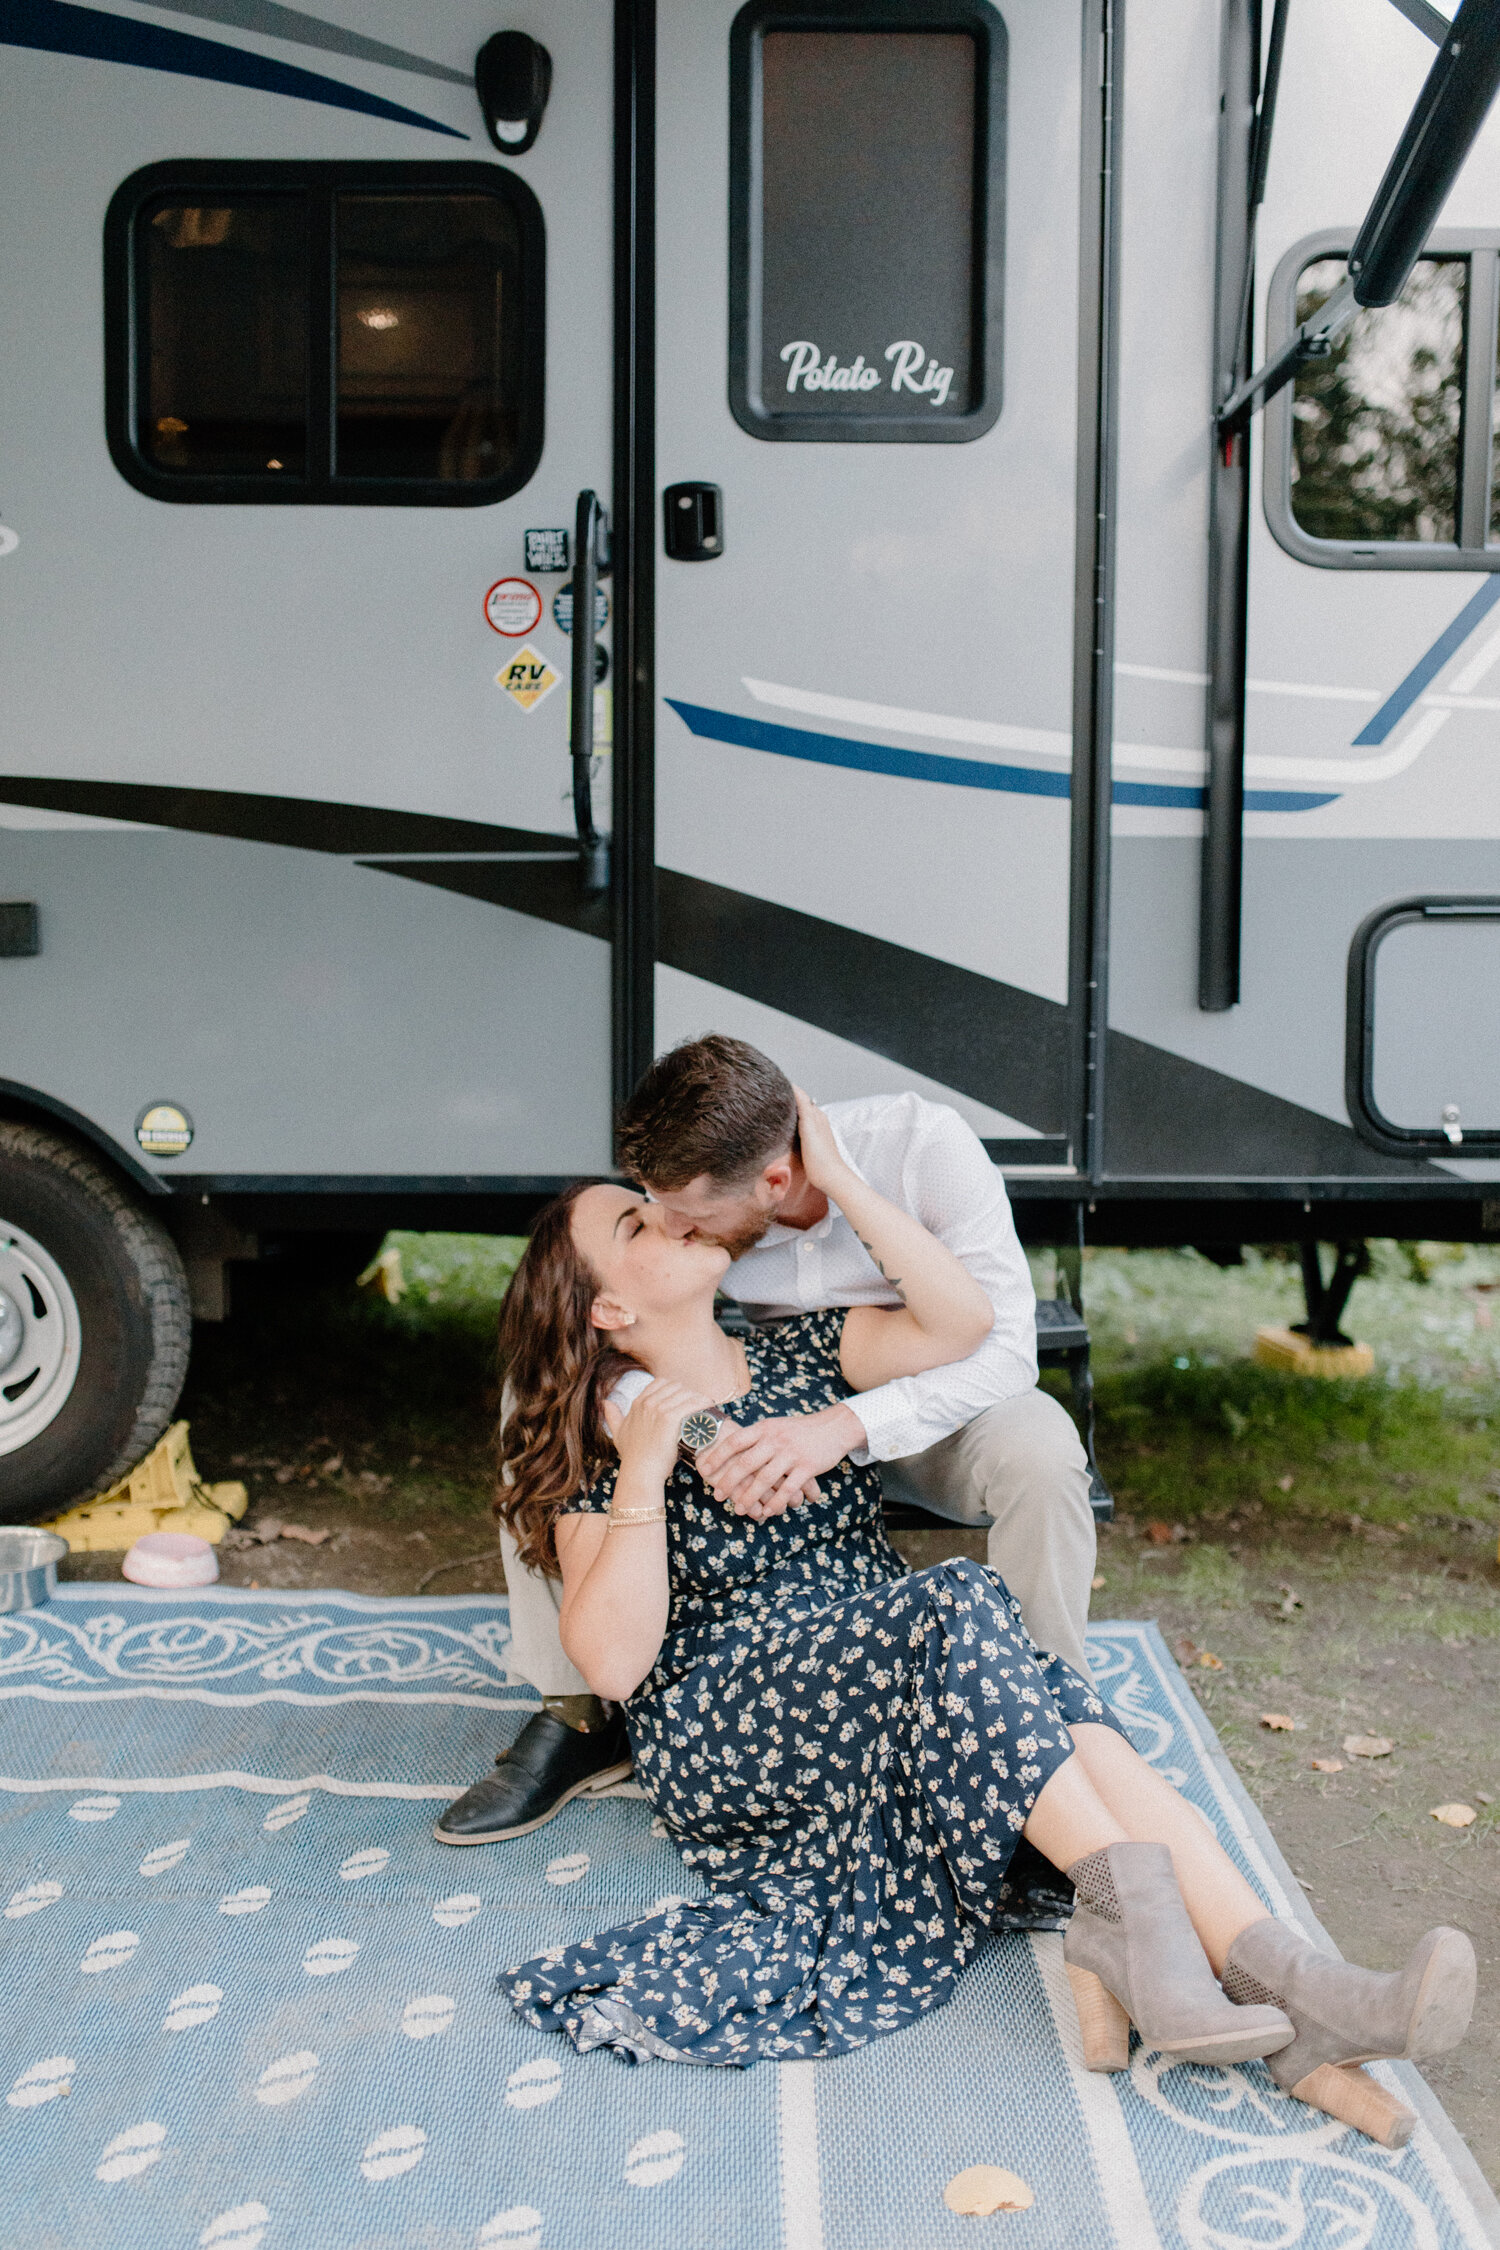  Sitting on a picnic blanket in front of their camper, Ottawa, Canada’s Chelsea Mason Photography captures this couple smiling and cuddling during their engagement session. Camping engagement session, outdoorsy camping engagement session, picnic blan